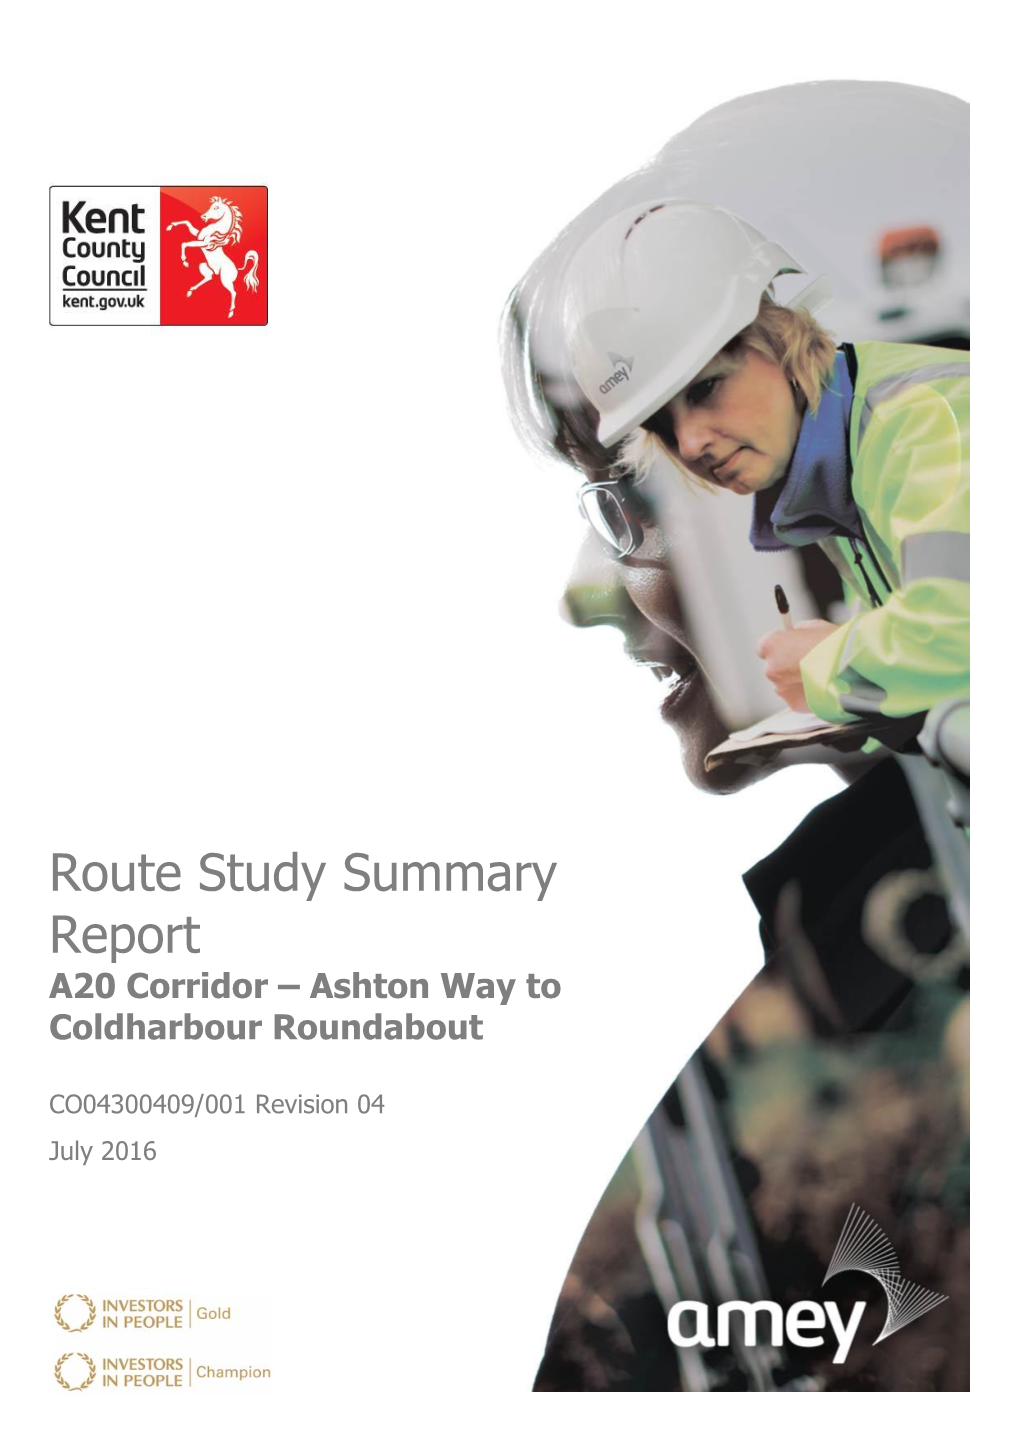 Route Study Summary Report A20 Corridor – Ashton Way to Coldharbour Roundabout